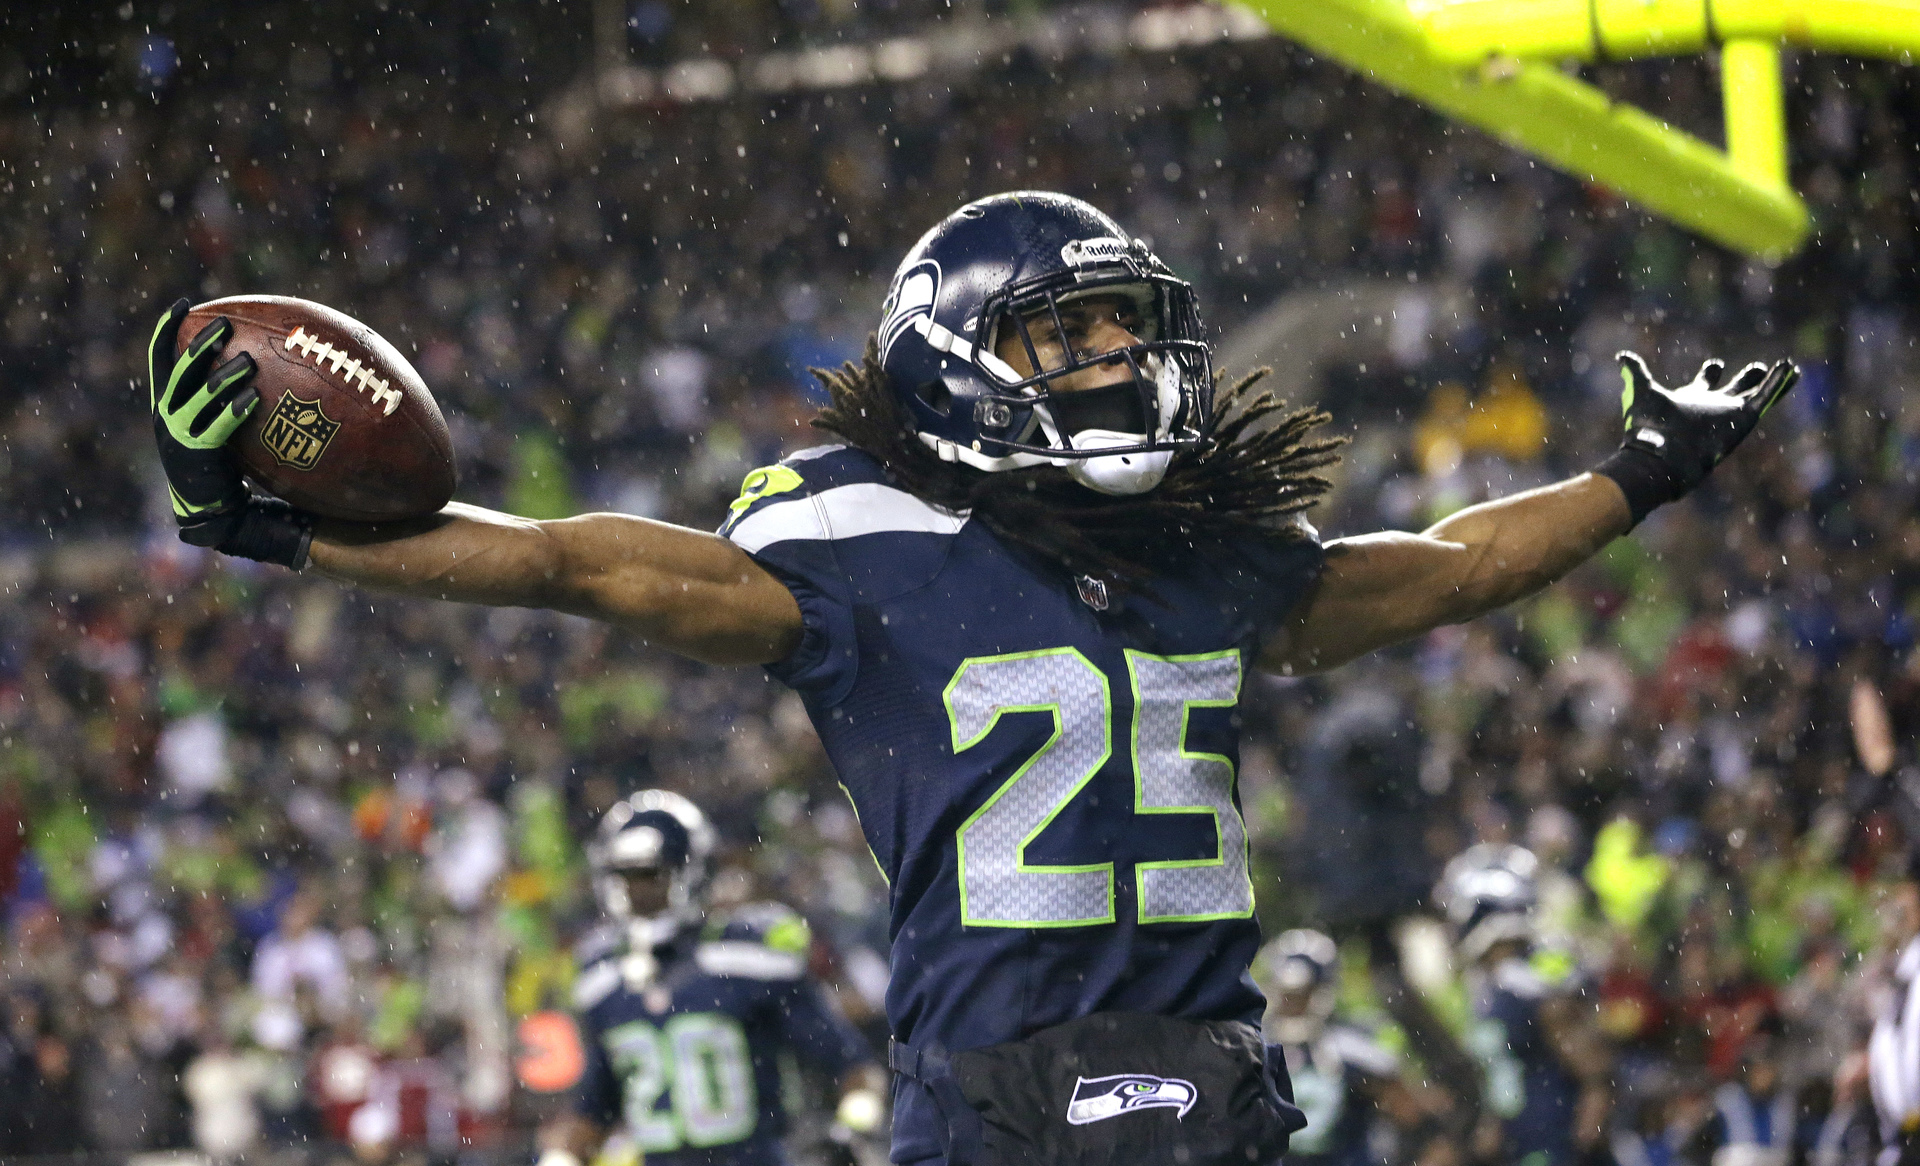 Seattle Seahawks' Richard Sherman motions to fans after intercepting in the end zone against the San Francisco 49ers in the second half of an NFL football game, Sunday, Dec. 23, 2012, in Seattle. The Seahawks won 42-13. (AP Photo/Elaine Thompson)